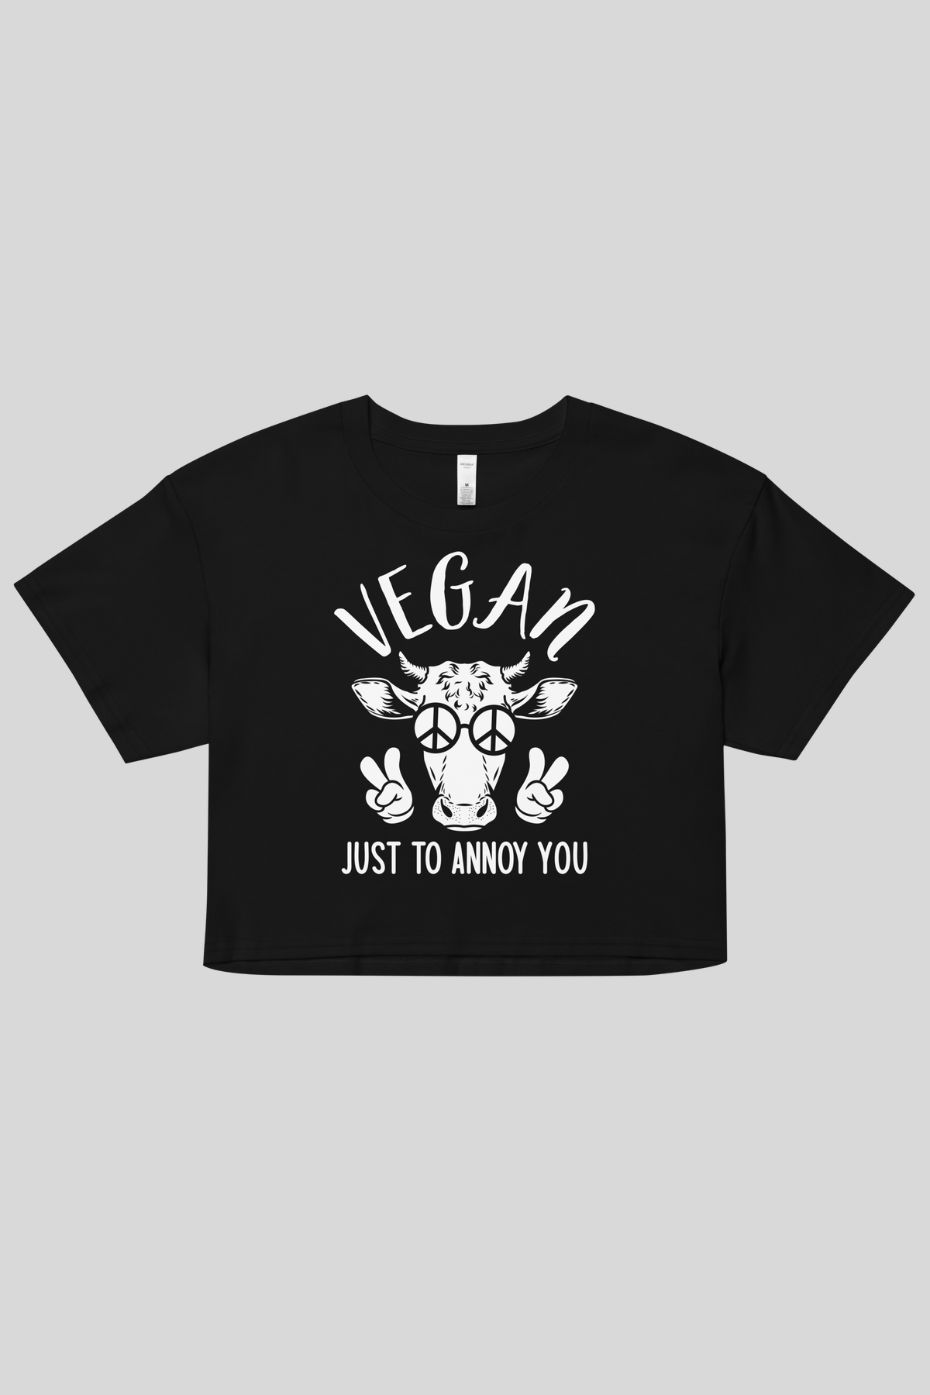 Just To Annoy You - Women’s crop top